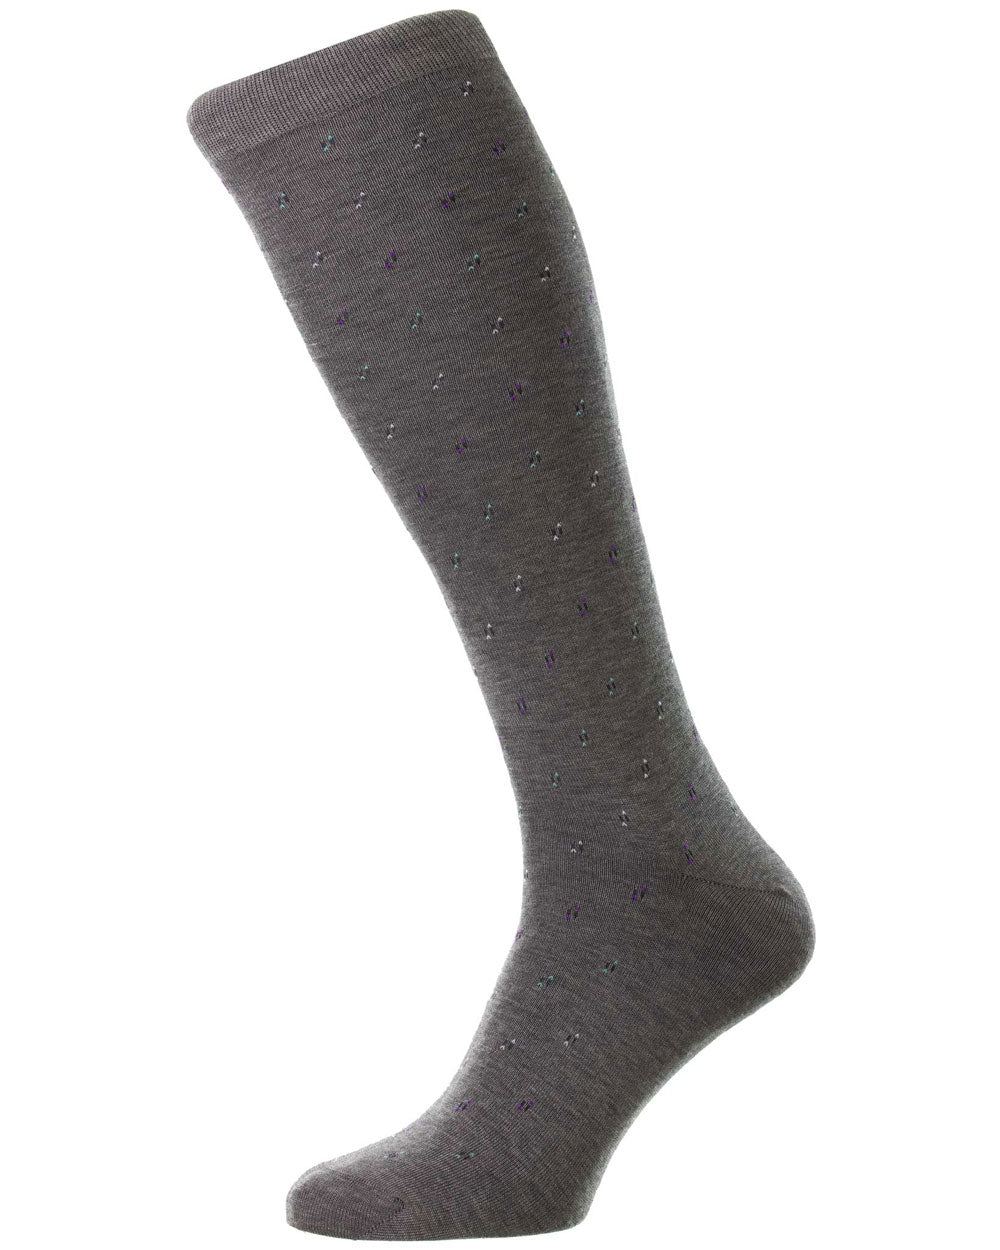 Addison Cotton Over the Calf Socks in Mid Grey